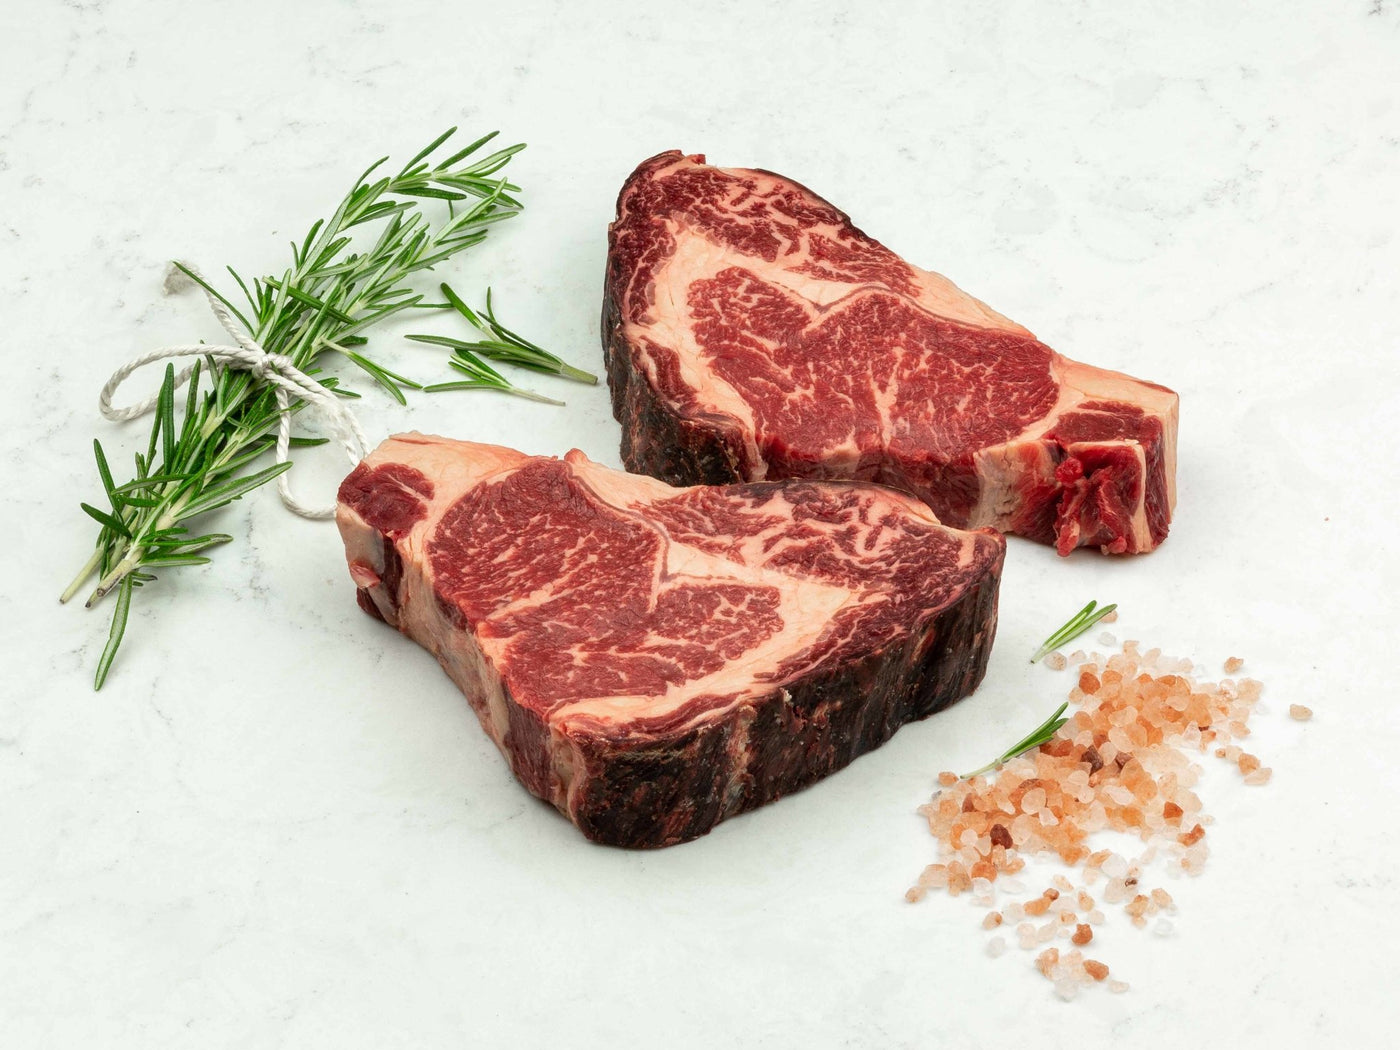 Dry-Aged Galician Ribeye Steak - Beef - Thomas Joseph Butchery - Ethical Dry-Aged Meat The Best Steak UK Thomas Joseph Butchery